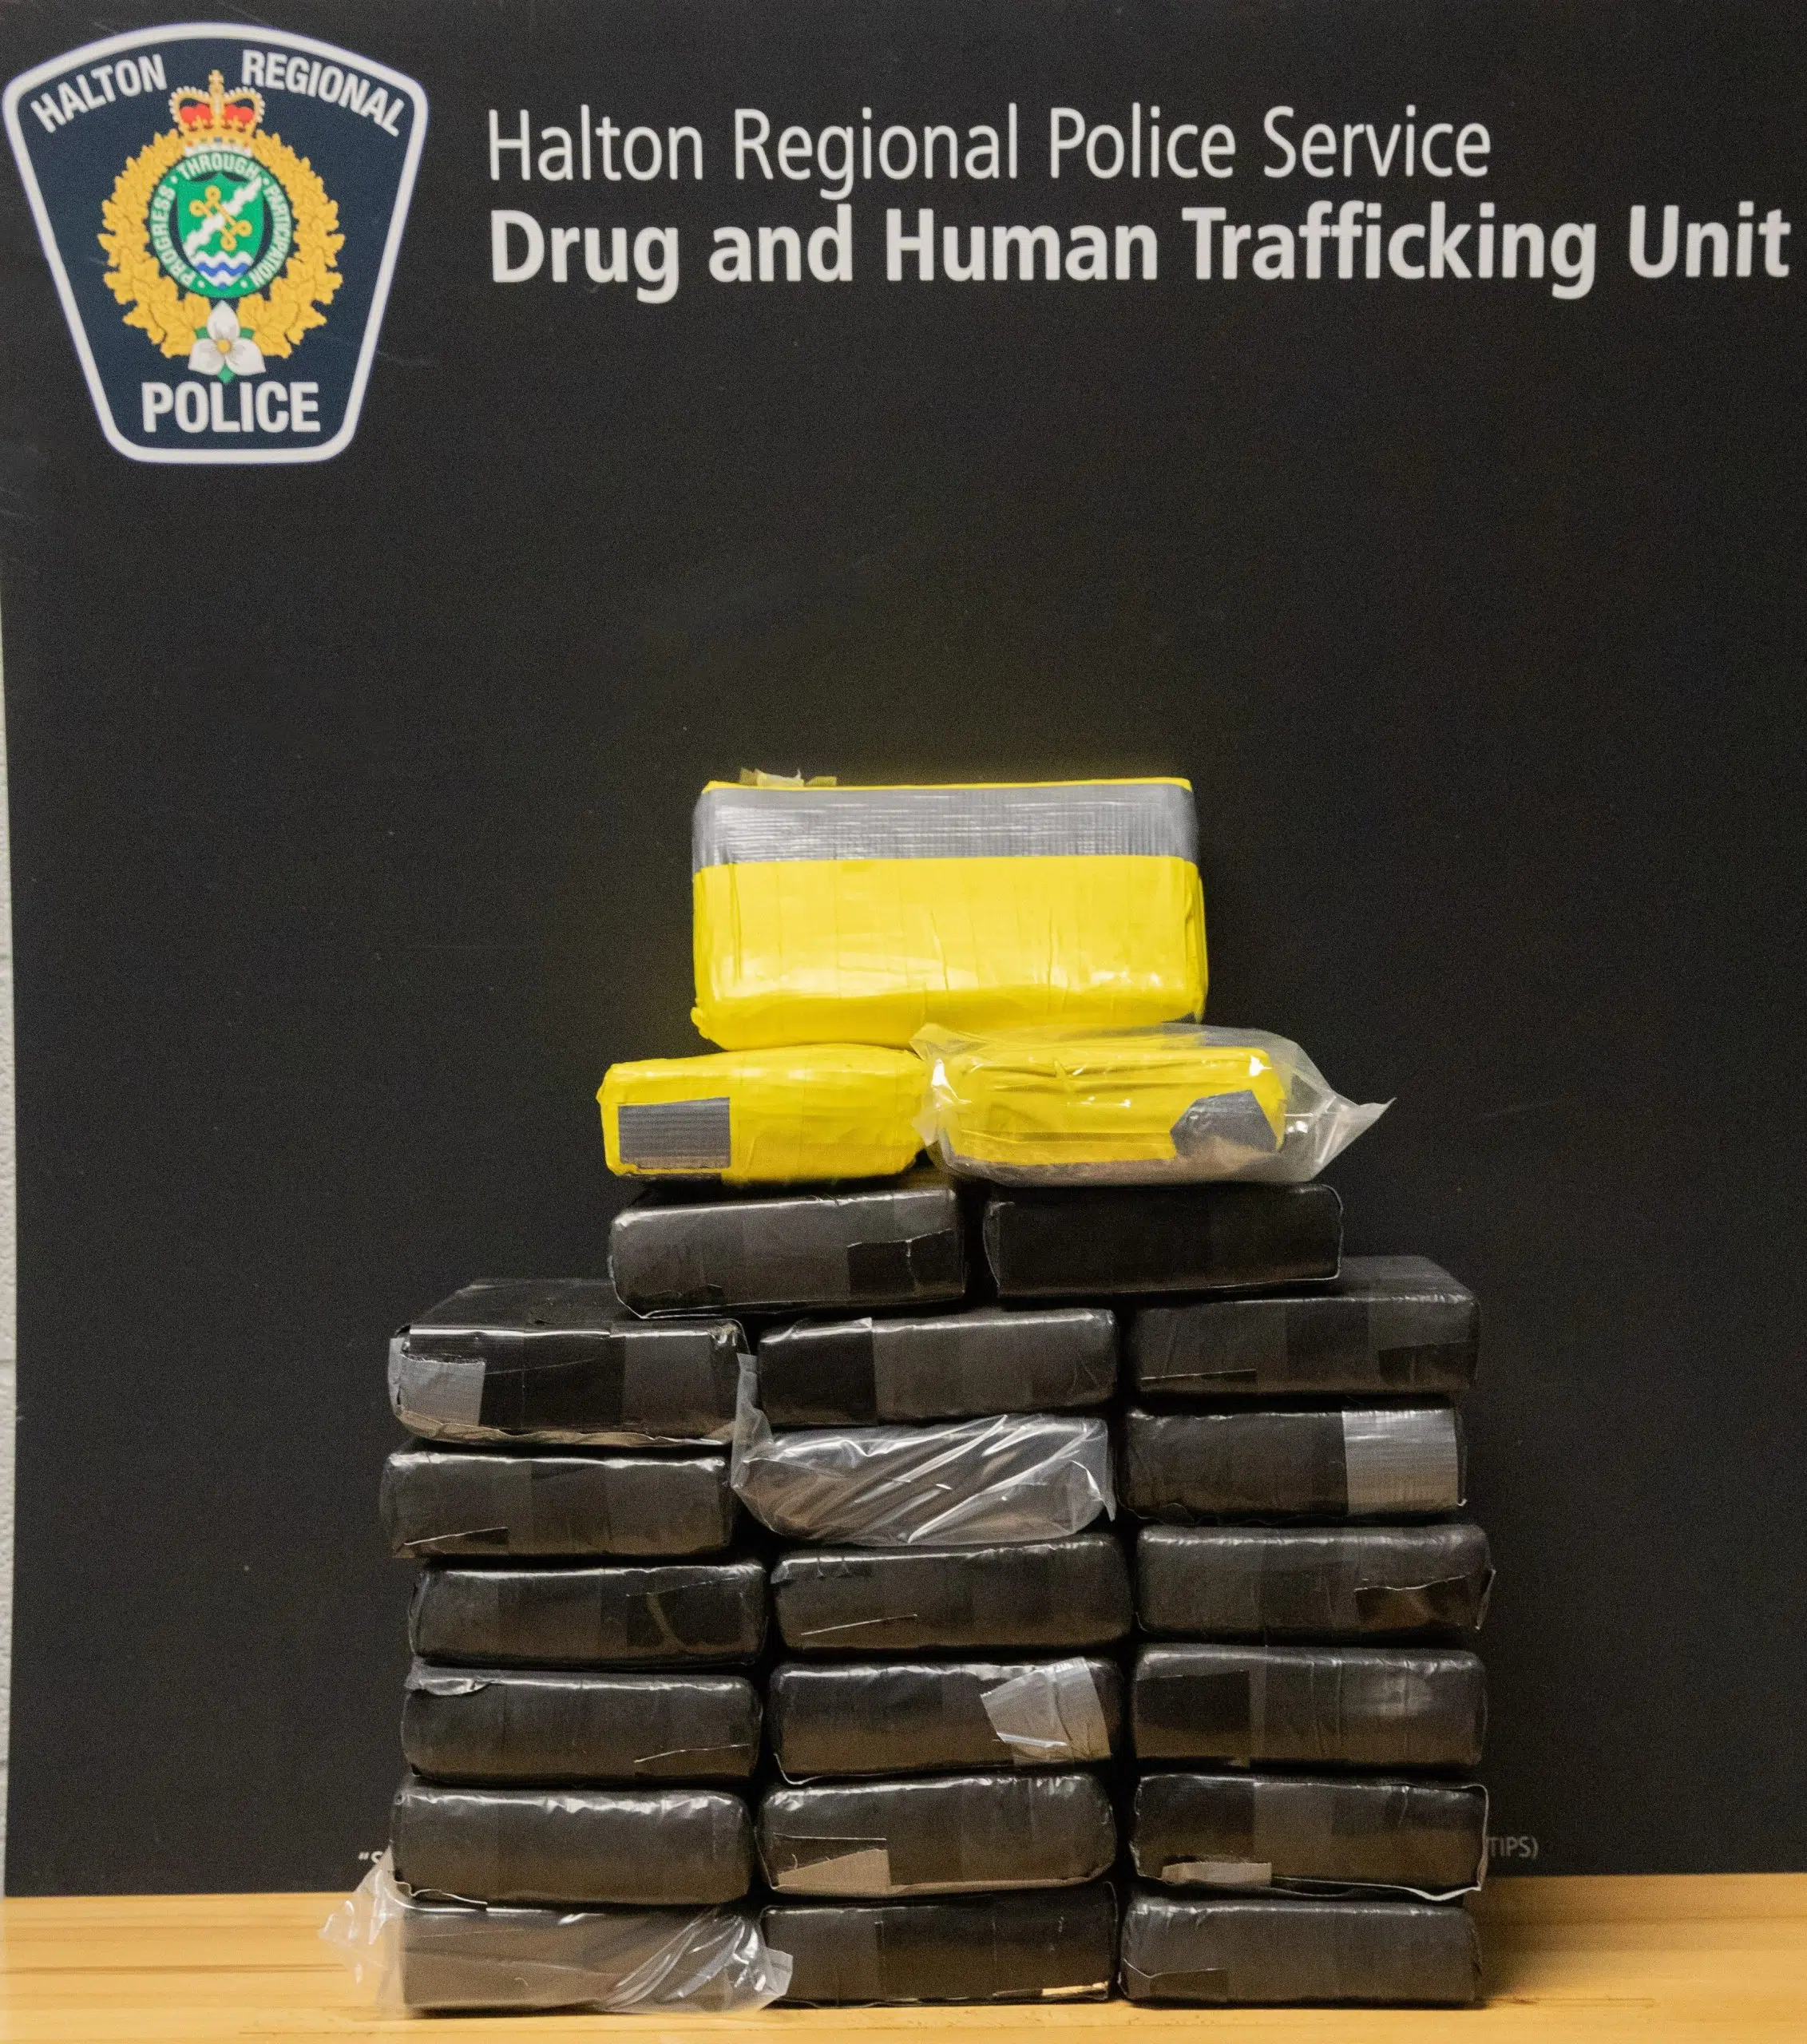 More than $1 million in cocaine seized by Halton Police